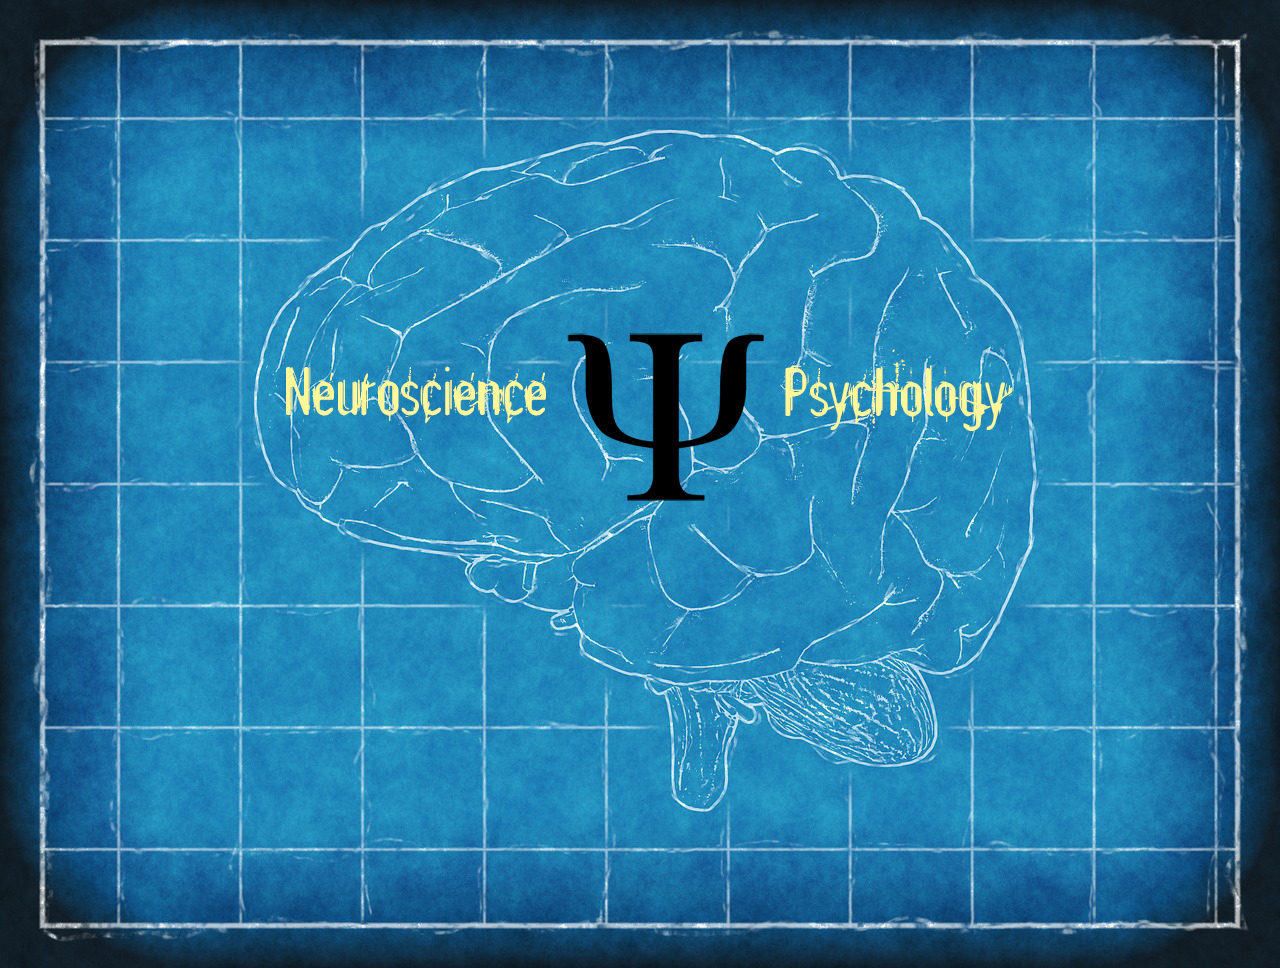 Excellent article on the role of neuroscience in psychology by Dr. Kevin Fleming.